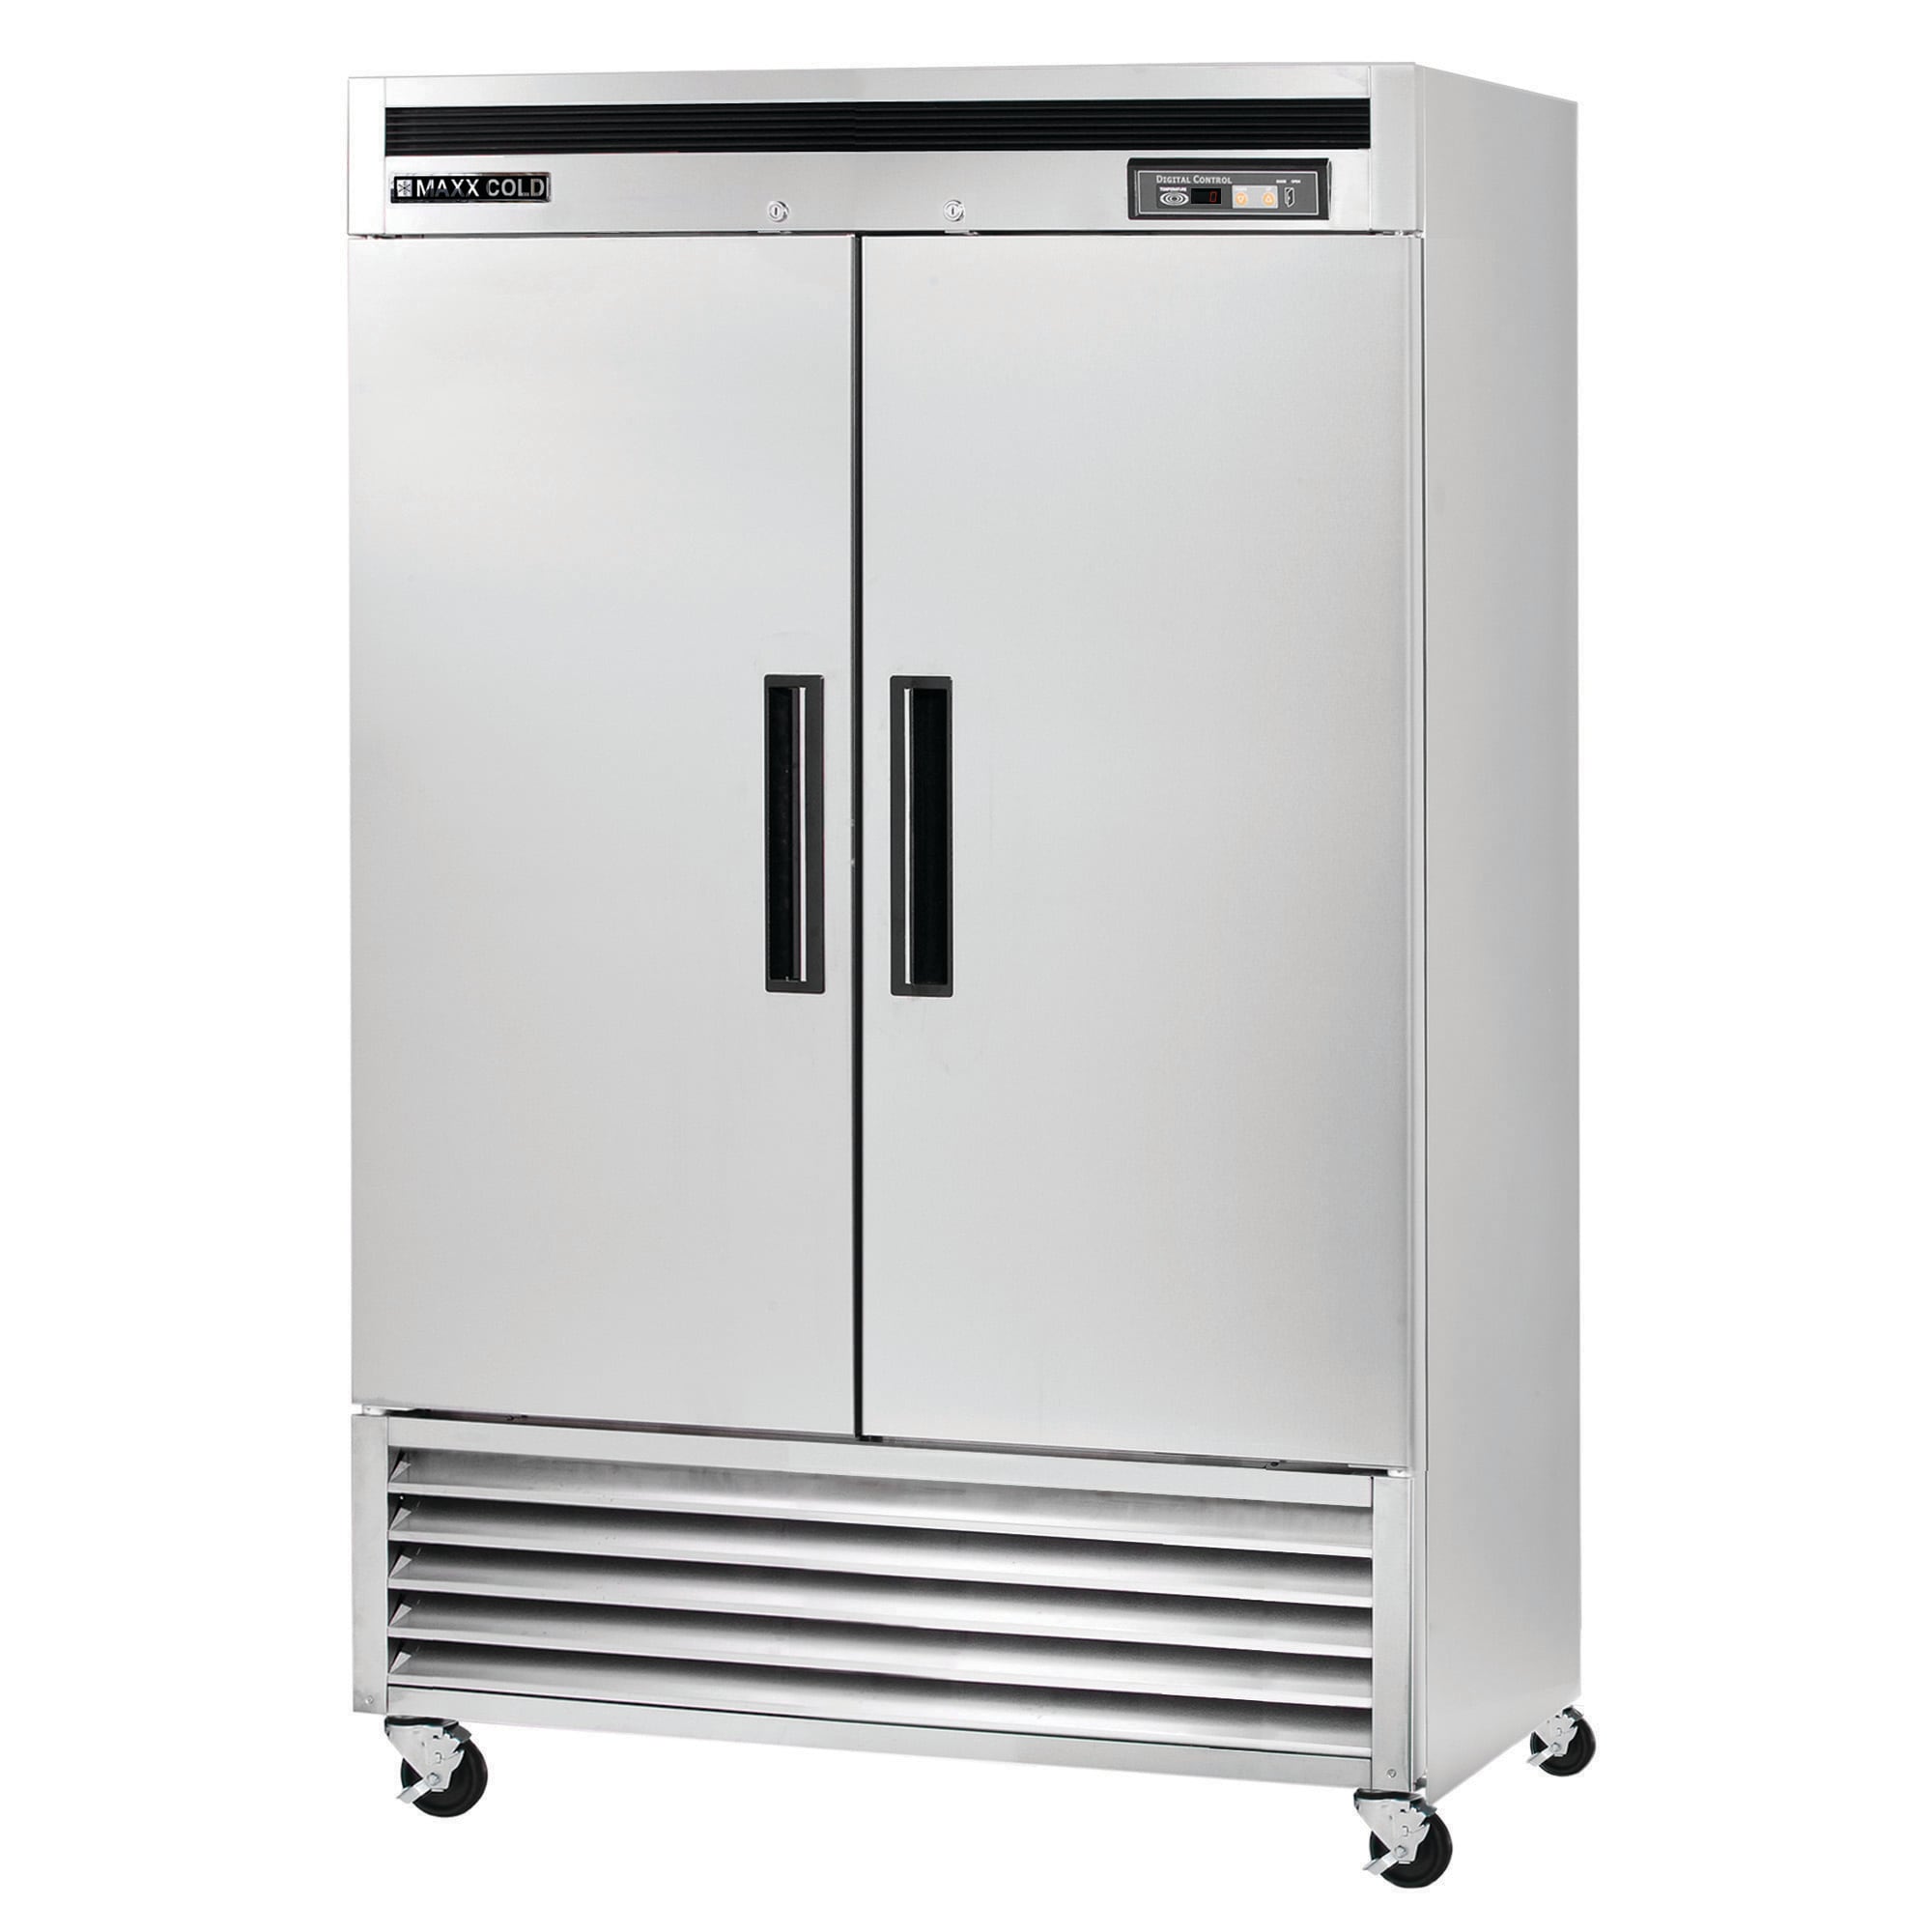 KoolMore 41.3-cu ft Frost-free Commercial Freezer (Stainless Steel